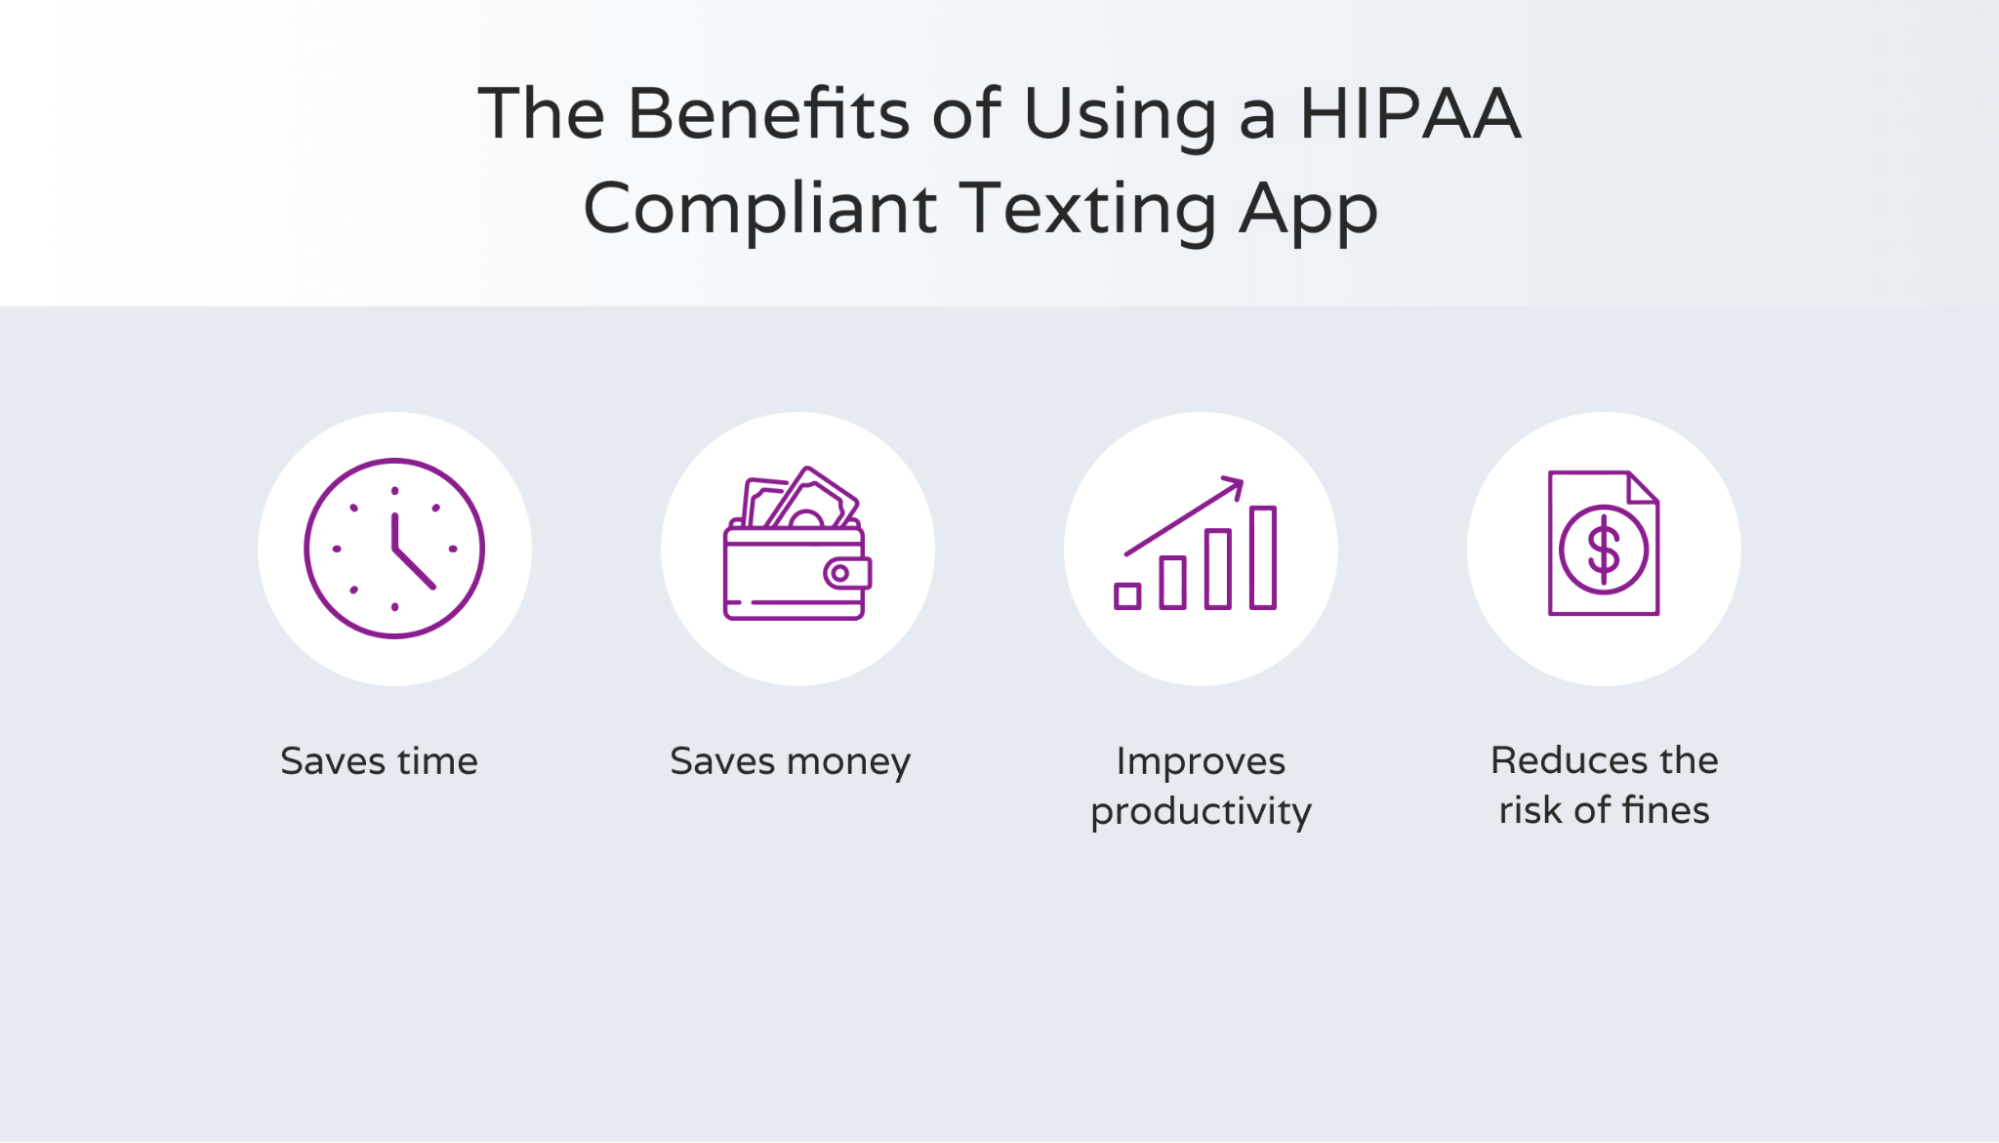 Benefits of hipaa compliant texting apps